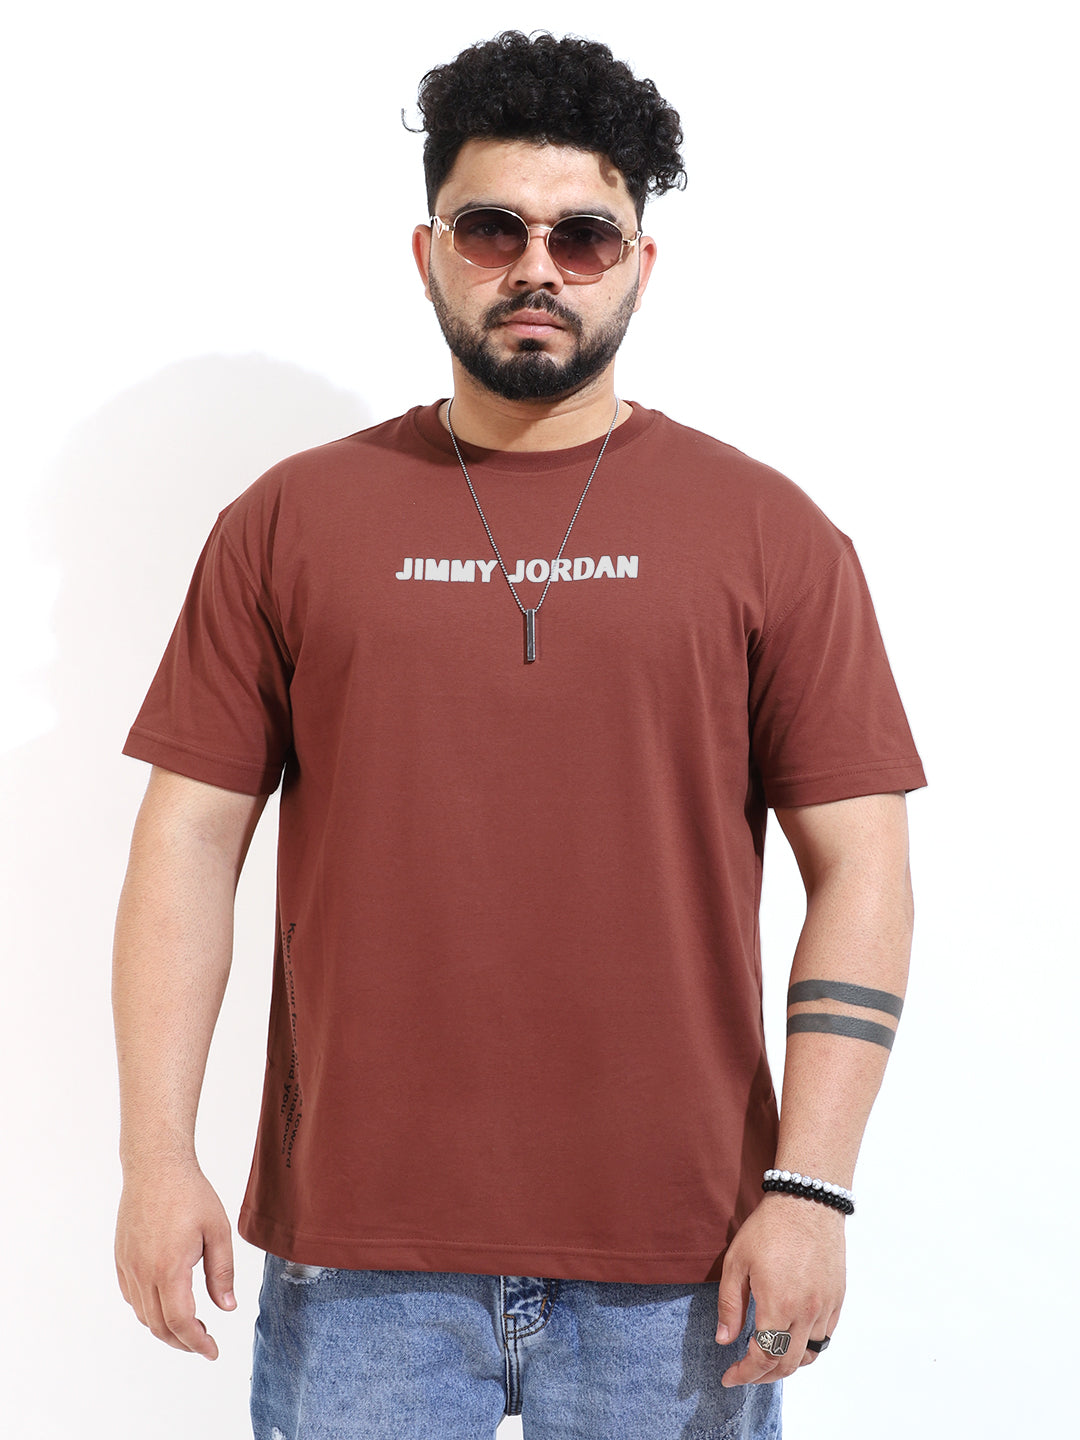 The Square Oversized Brown T-Shirt